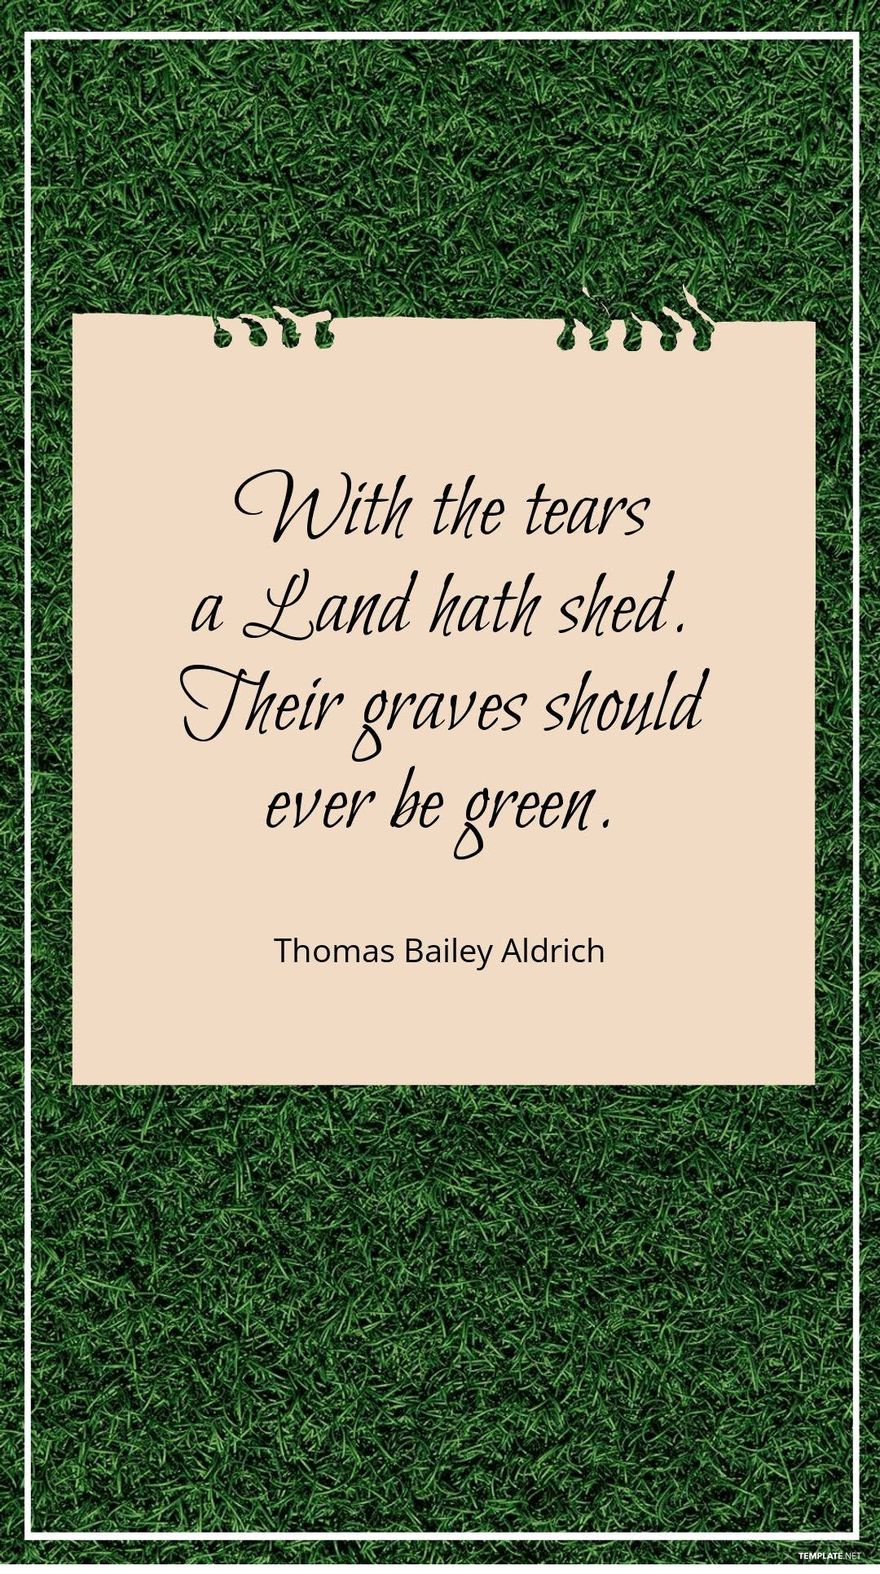 Thomas Bailey Aldrich - With the tears a Land hath shed. Their graves should ever be green. in JPG